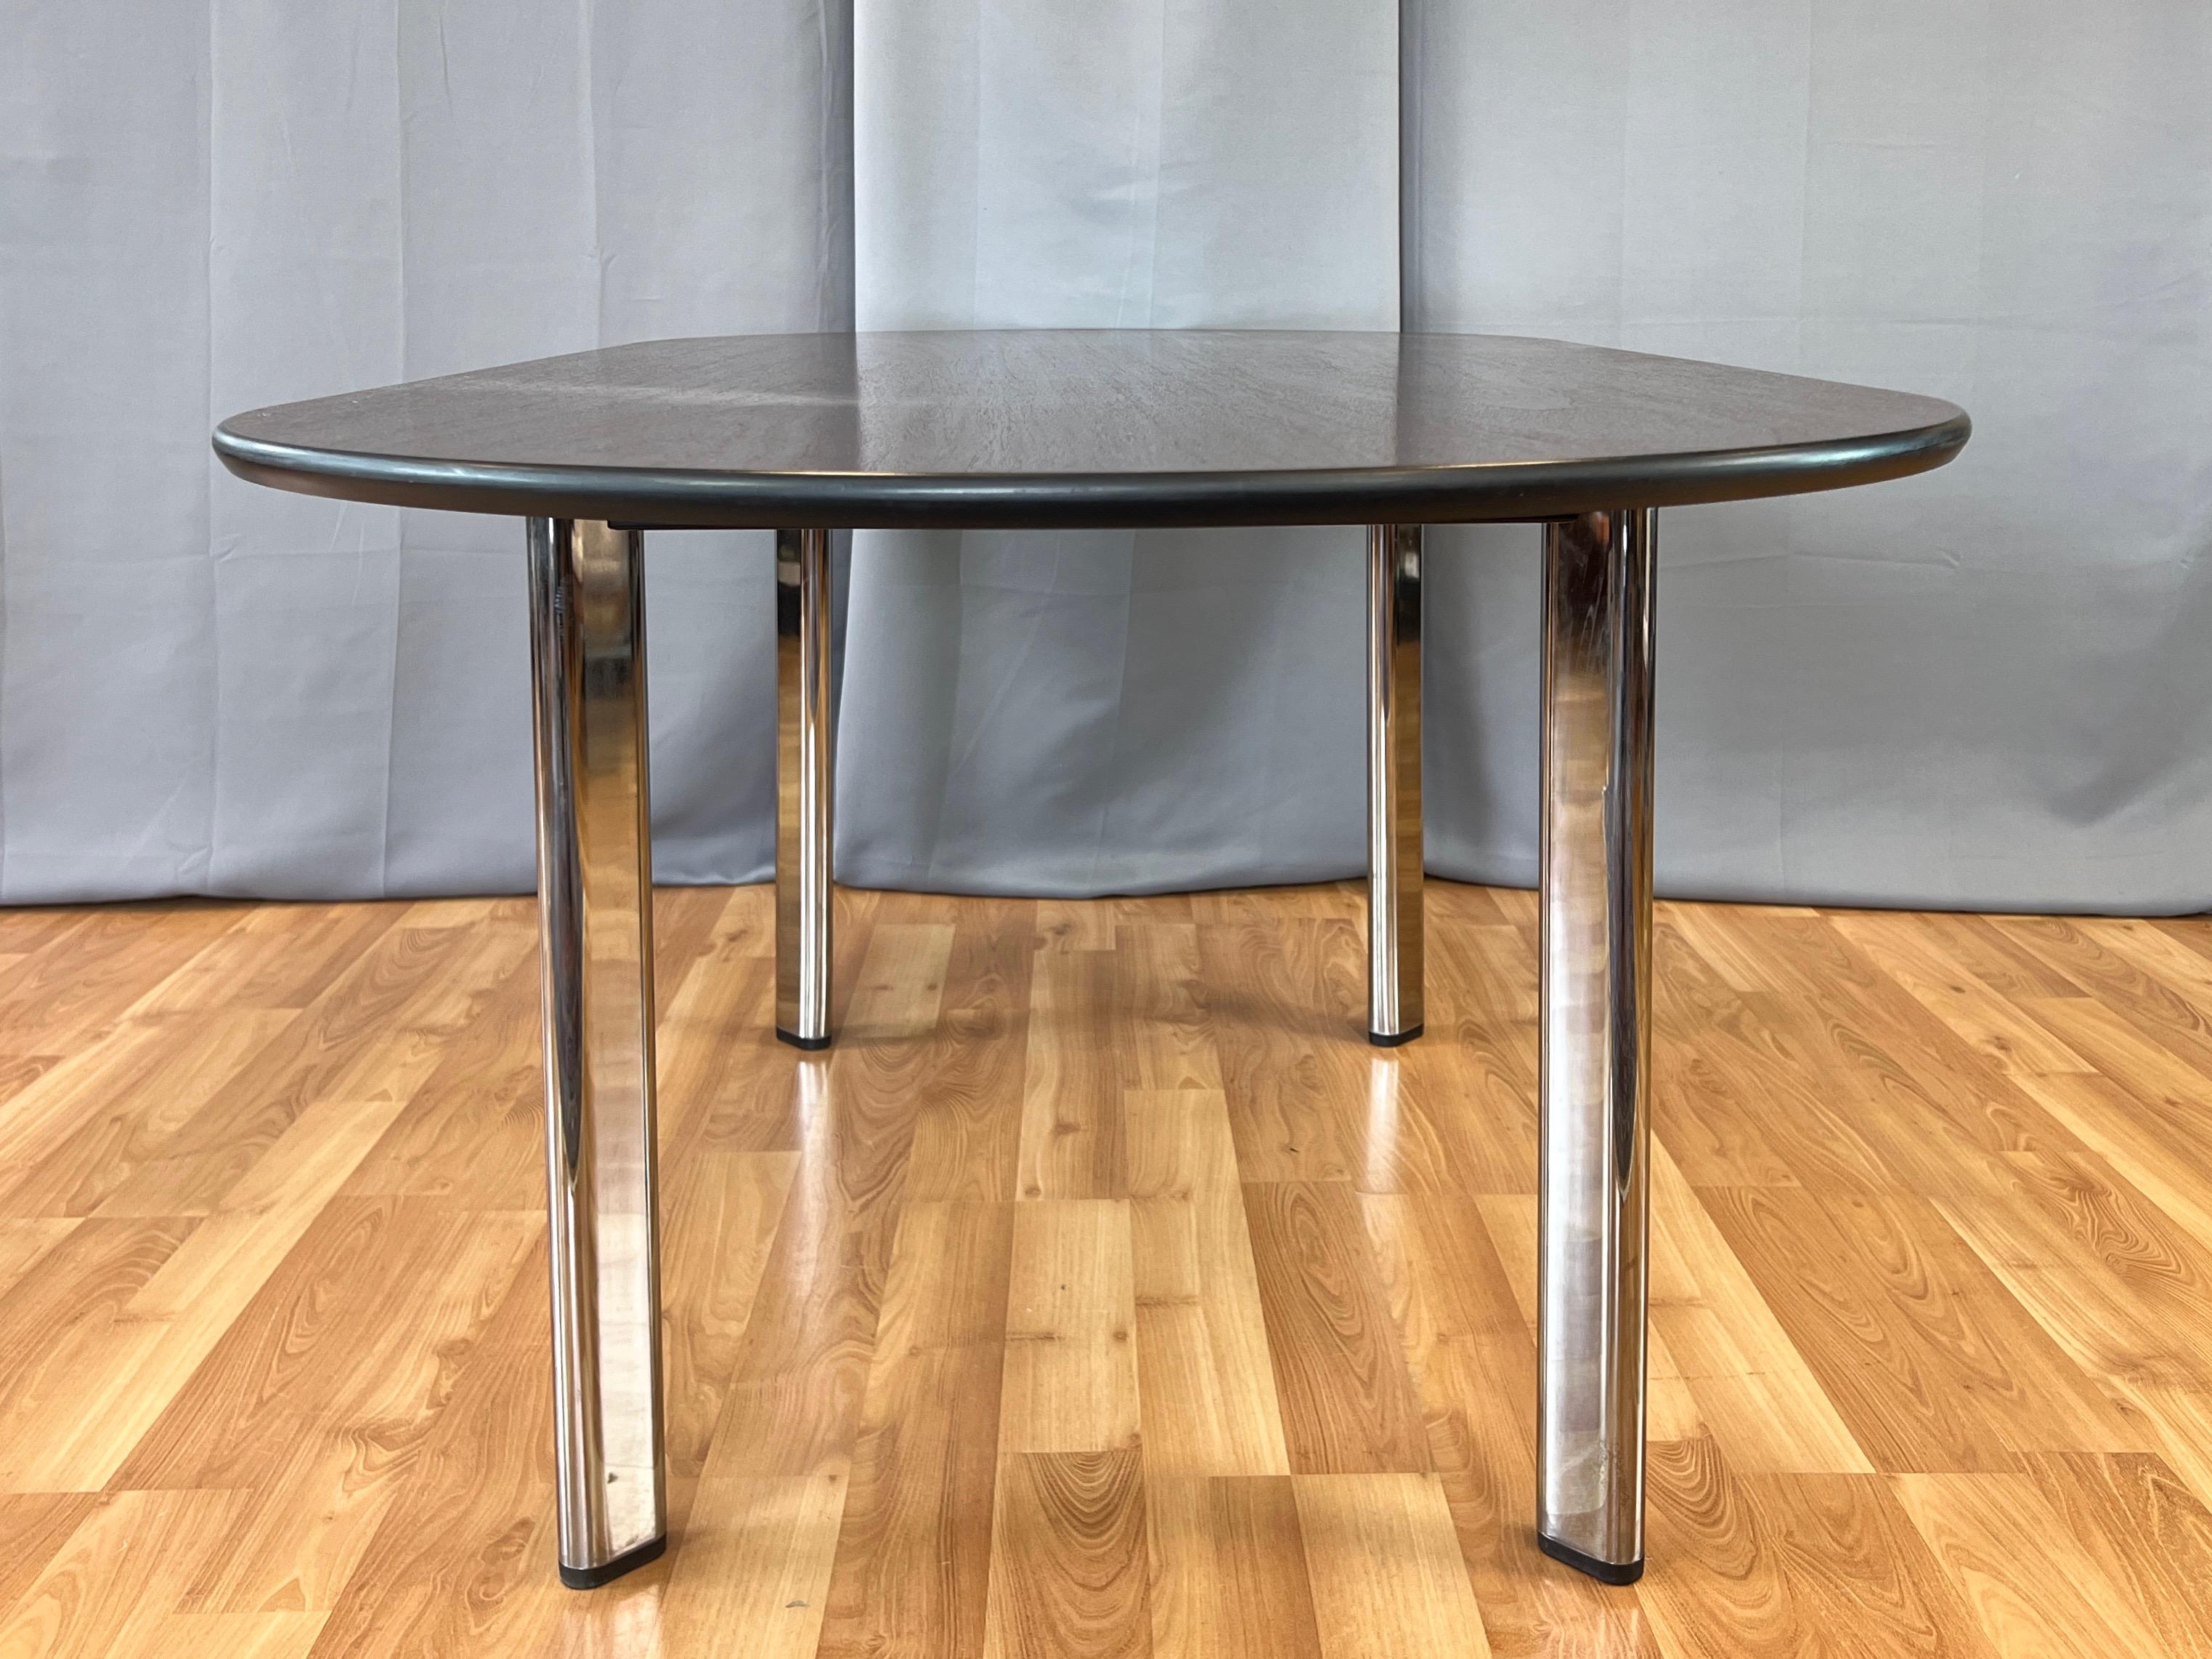 Joseph D’Urso for Knoll High Table in American Cherry and Chrome, 1995 For Sale 1